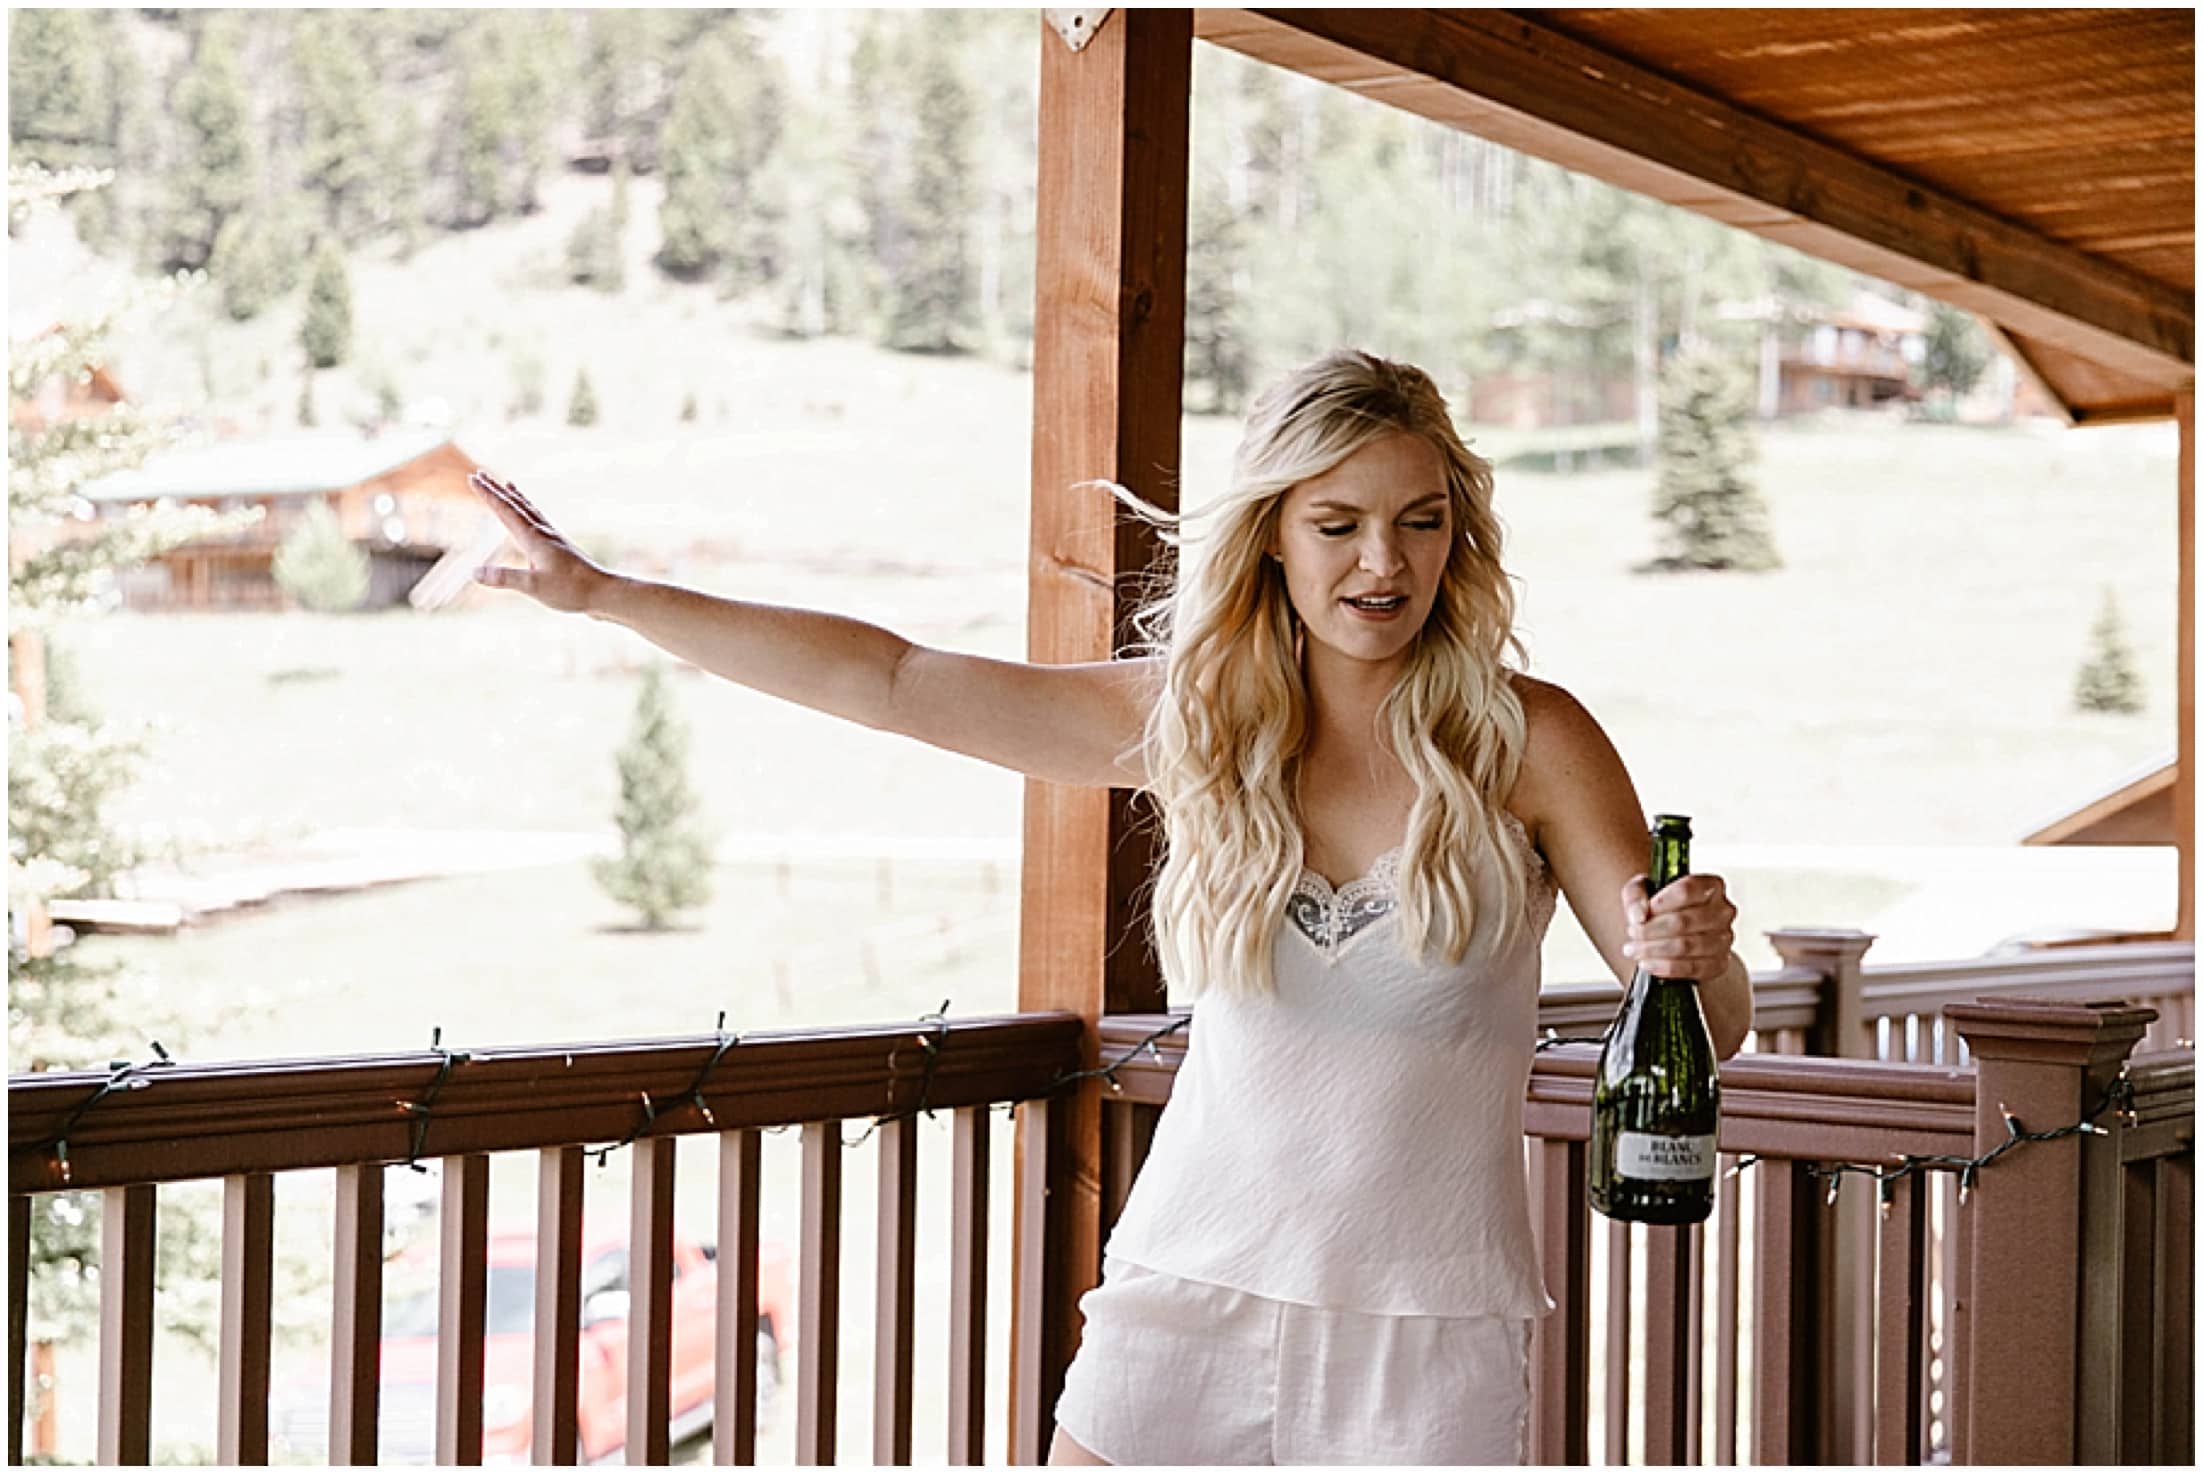 bride dancing with champagne, Aspen Lodge, Red River New Mexico, Red River New Mexico Wedding, Weddings in New Mexico, Destination mountain wedding, destination mountain elopement, elopements in new mexico, places to get married in new mexico, destination elopement photographer, mountain wedding photographer, new mexico wedding photographer, new mexico elopement photographer, brit nicole photography, cabin wedding, new mexico cabin wedding, mountain landscape for wedding, small intimate mountain wedding, small intimate river wedding, wedding photographer in new mexico, junebug weddings, the knot, wedding wire, 41 productions with lindsay gomez, dallas texas bride, DJ Allen Gallegos, Tao Cakes, New Mexico Wedding planner karen kelly, barnes jewelry, Lillian West bridal dress, Lang’s Bridal, enchanted florist wedding flowers, places to get married in texas, texas wedding photographer, texas elopement photographer, forest wedding, forest elopement, wooded area for wedding, wooded elopement, elopement in the woods